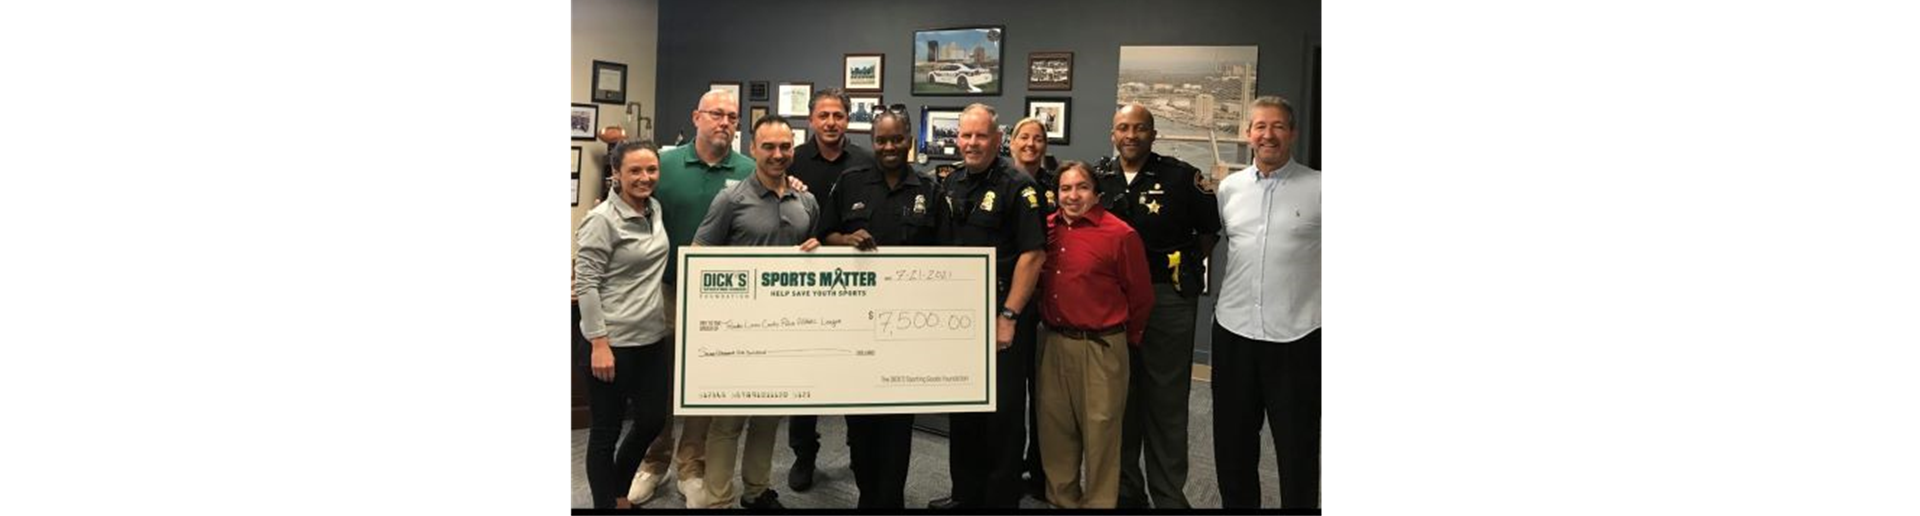 Toledo PAL receives gift from Dick's Sporting Goods